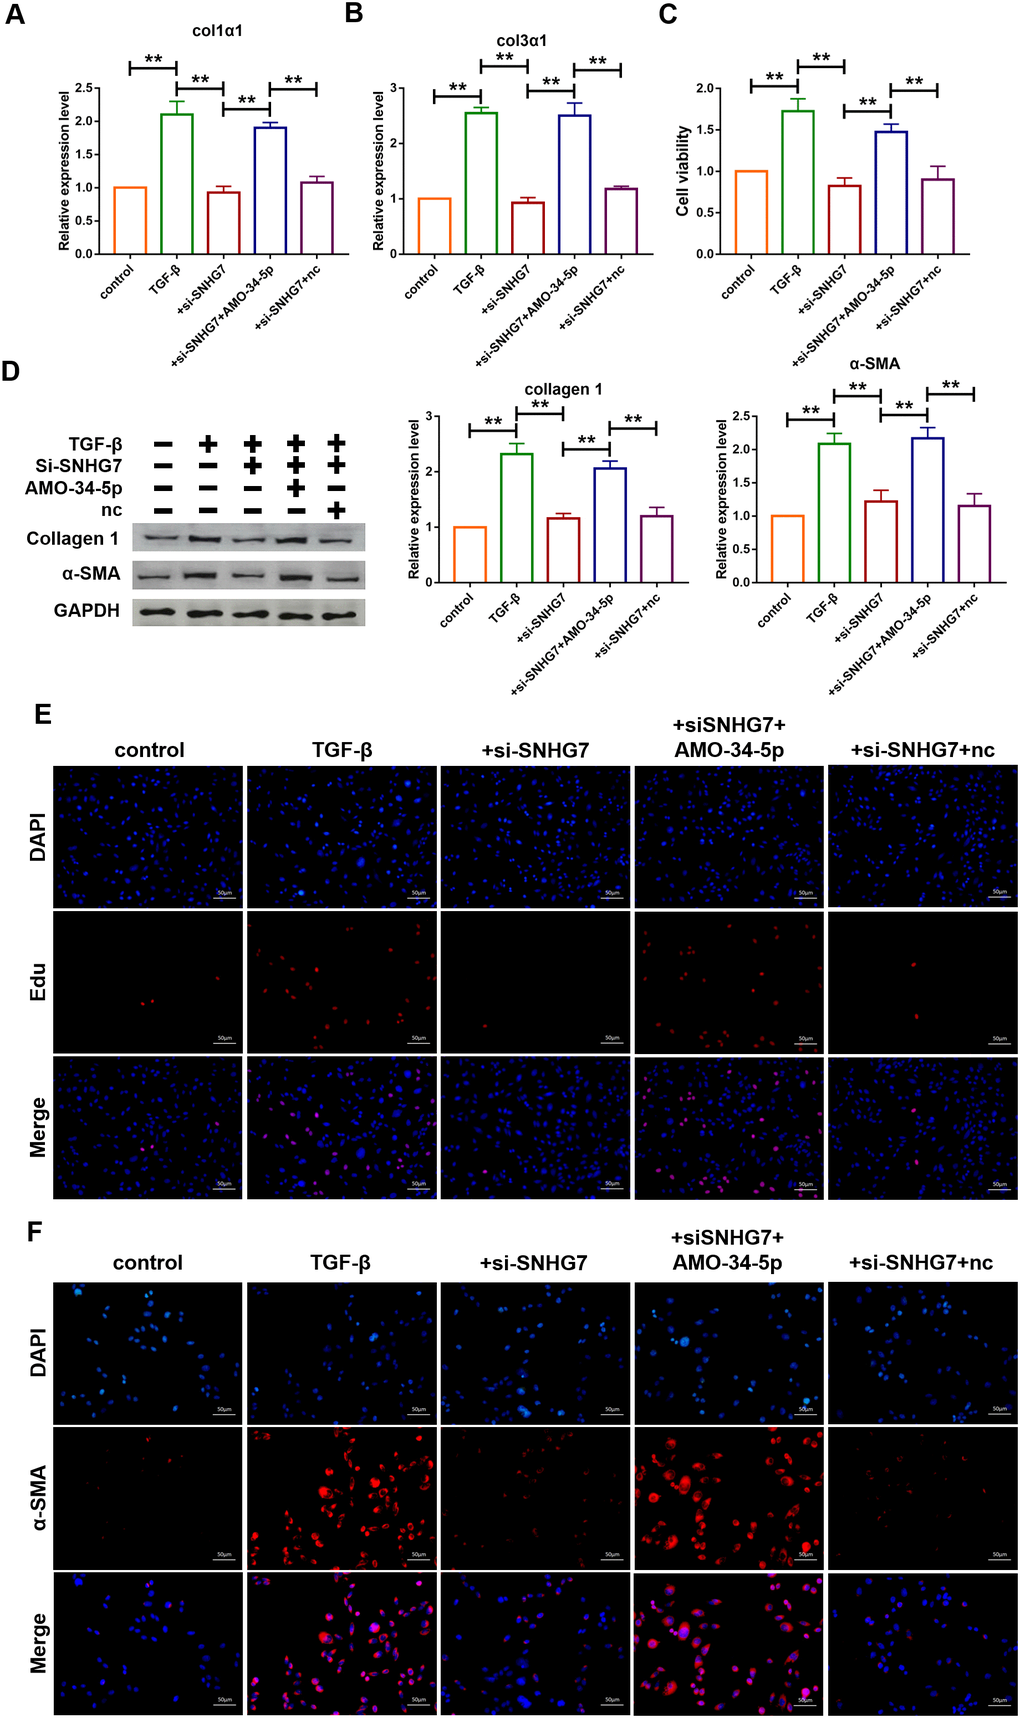 Silencing of lncRNA SNHG7 alleviated TGF-β1-induced fibrogenesis in cardiac fibroblasts. (A, B) Suppression of SNHG7 attenuated the increase in collagen 1α1 and collagen 3α1 expression induced by TGF-β1, as measured by qRT-PCR; GAPDH mRNA served as an internal control. Data was presented as mean ± SEM; one-way ANOVA was used for the statistical analysis. n=5 independent cell cultures. (C) Western blotting analysis showing that knockdown of SNHG7 attenuated TGF-β1-induced fibrotic protein expression (Collagen I and α-SMA); GAPDH served as a loading control. Data was presented as mean ± SEM; one-way ANOVA was used for the statistical analysis. n=5 independent cell cultures. (D) MTT assay for the assessment of cell viability. Transfection of si-SNHG7 with or without AMO-34-5p in cardiac fibroblasts treated with TGF-β1 for 24h. Data was presented as mean ± SEM; one-way ANOVA was used for the statistical analysis. n=5 independent cell cultures. (E) EdU staining for the assessment of cell proliferation in cardiac fibroblasts inhibiting SNHG7 in the presence or absence of AMO-34-5p mimics. Scale bars represented 50 μm. (F) Representative images of immunofluorescence staining showing that knockdown of SNHG7 abated the TGF-β1-induced fibroblast-myofibroblast transition, which was promoted by AMO-34-5p. Scale bars represented 50 μm. **P